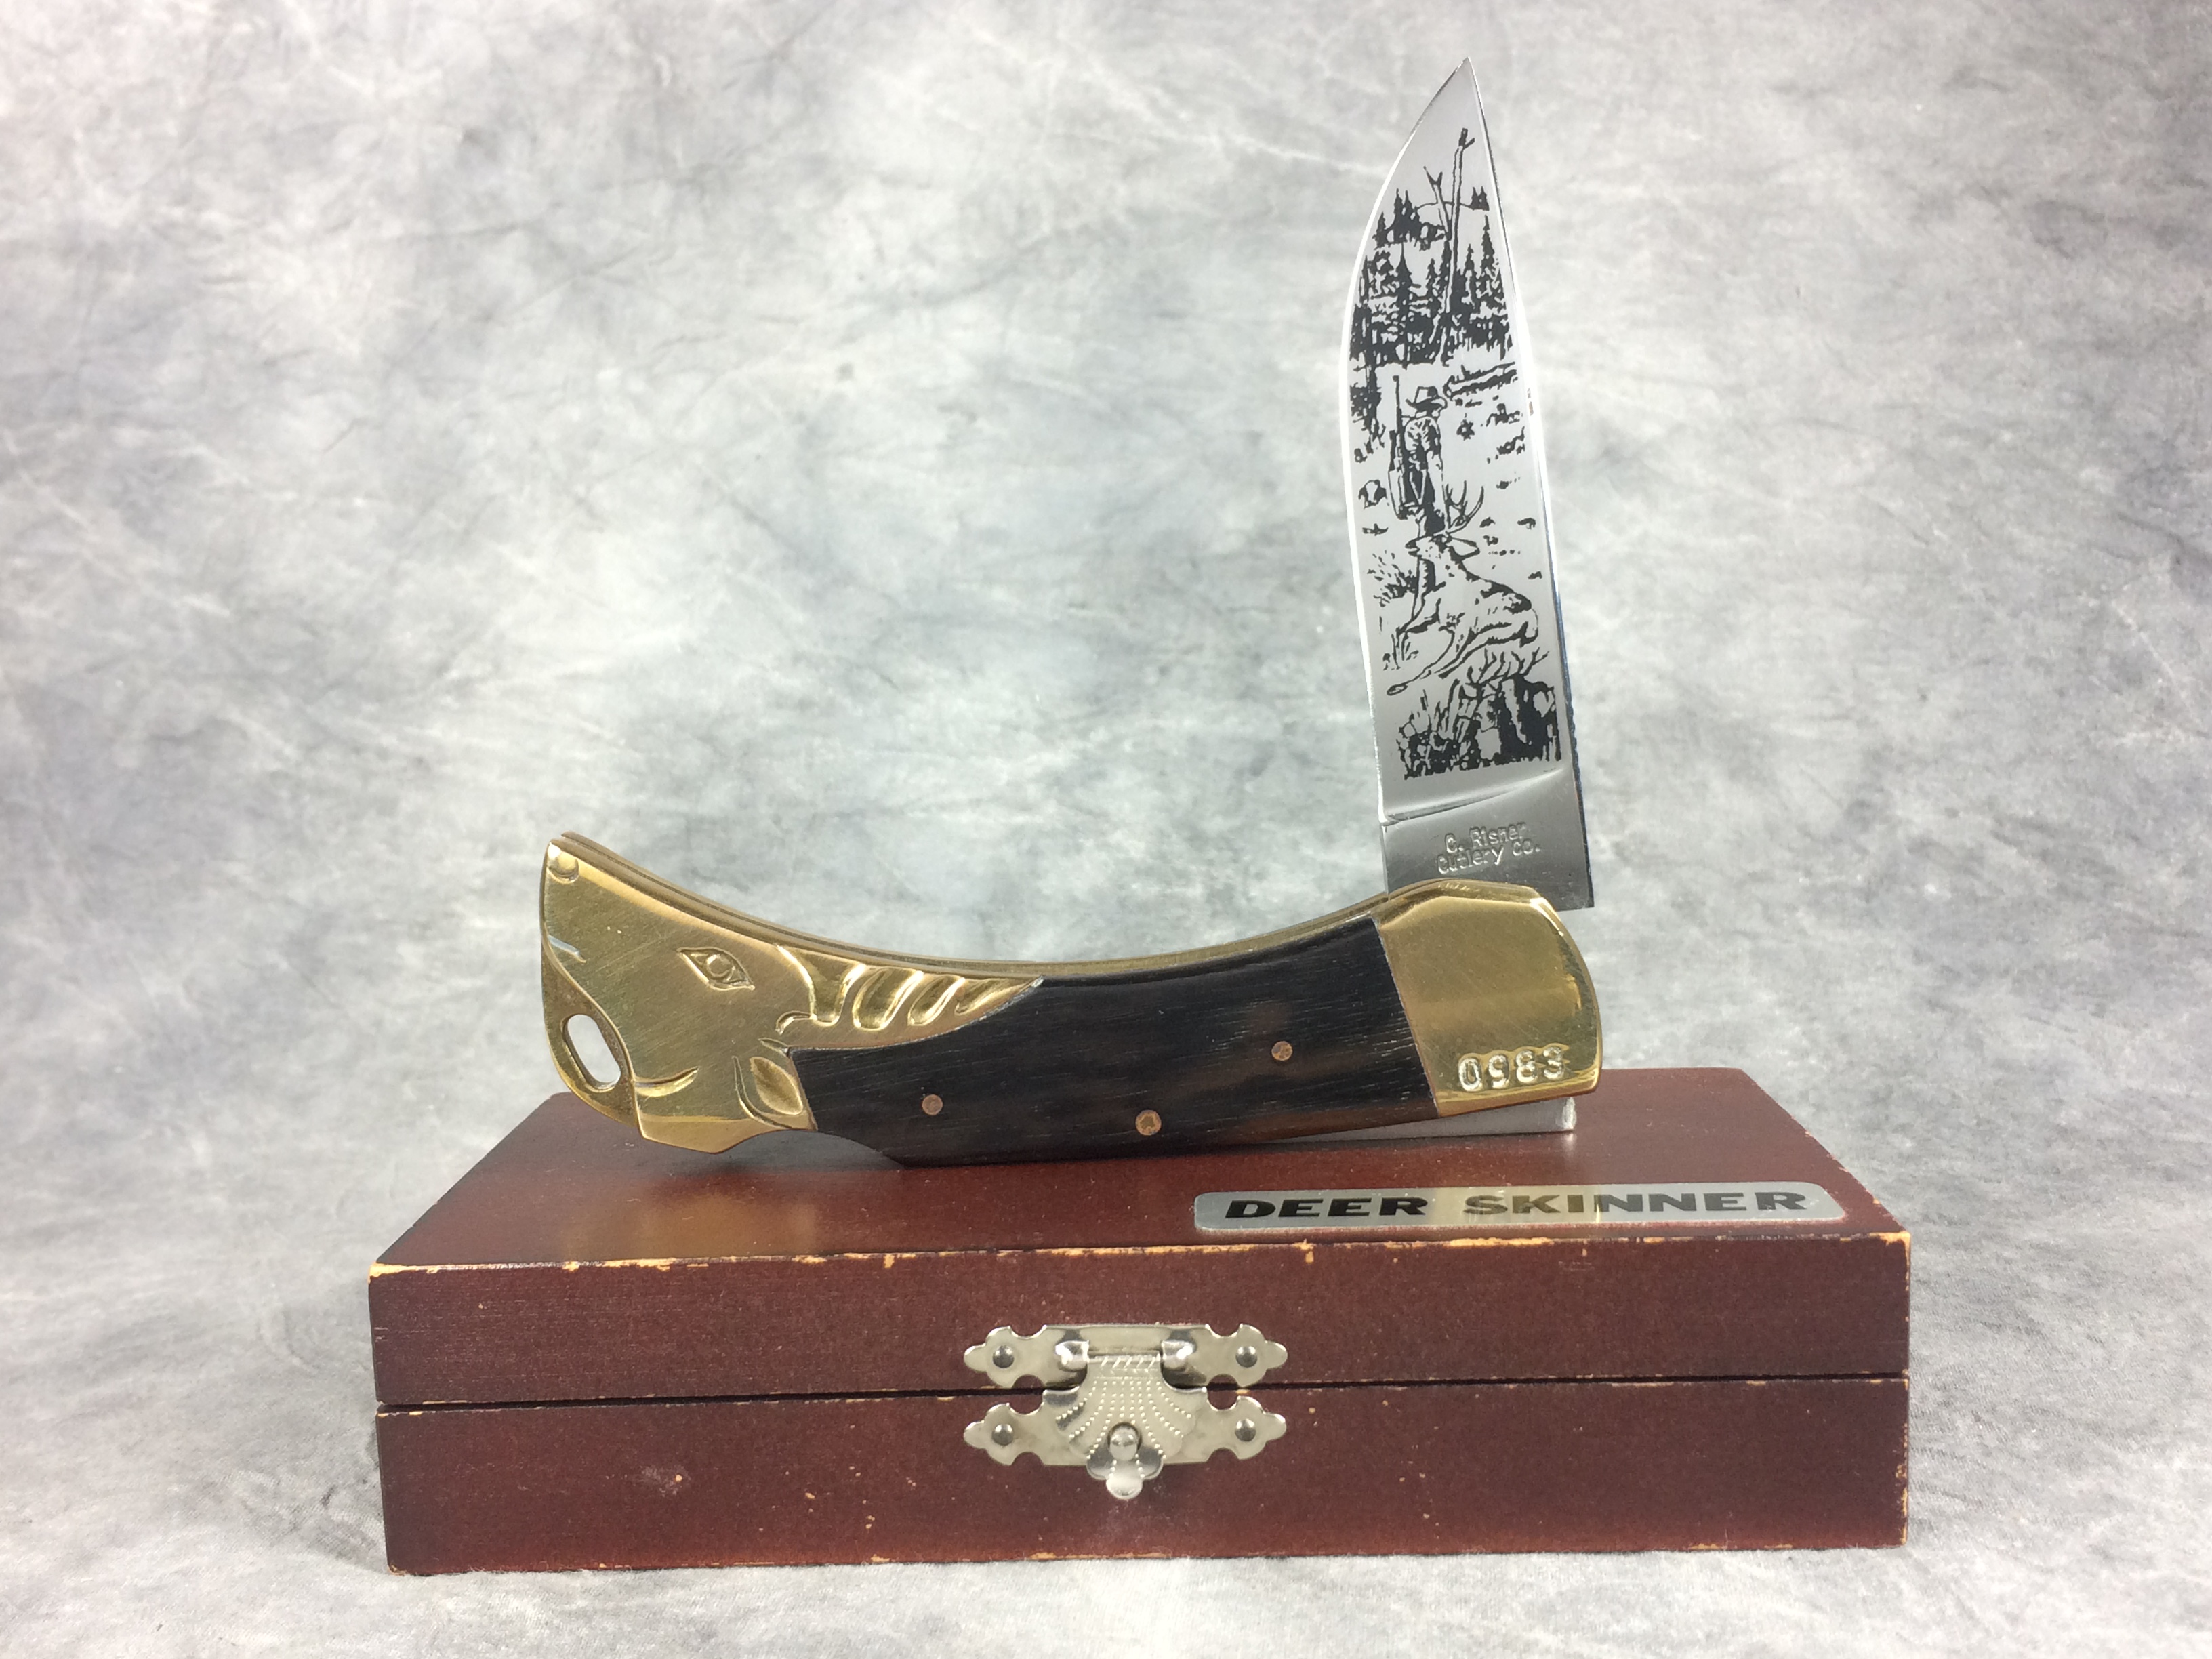 What is a C. RISNER CUTLERY CO Deer Skinner Limited Edition Sing